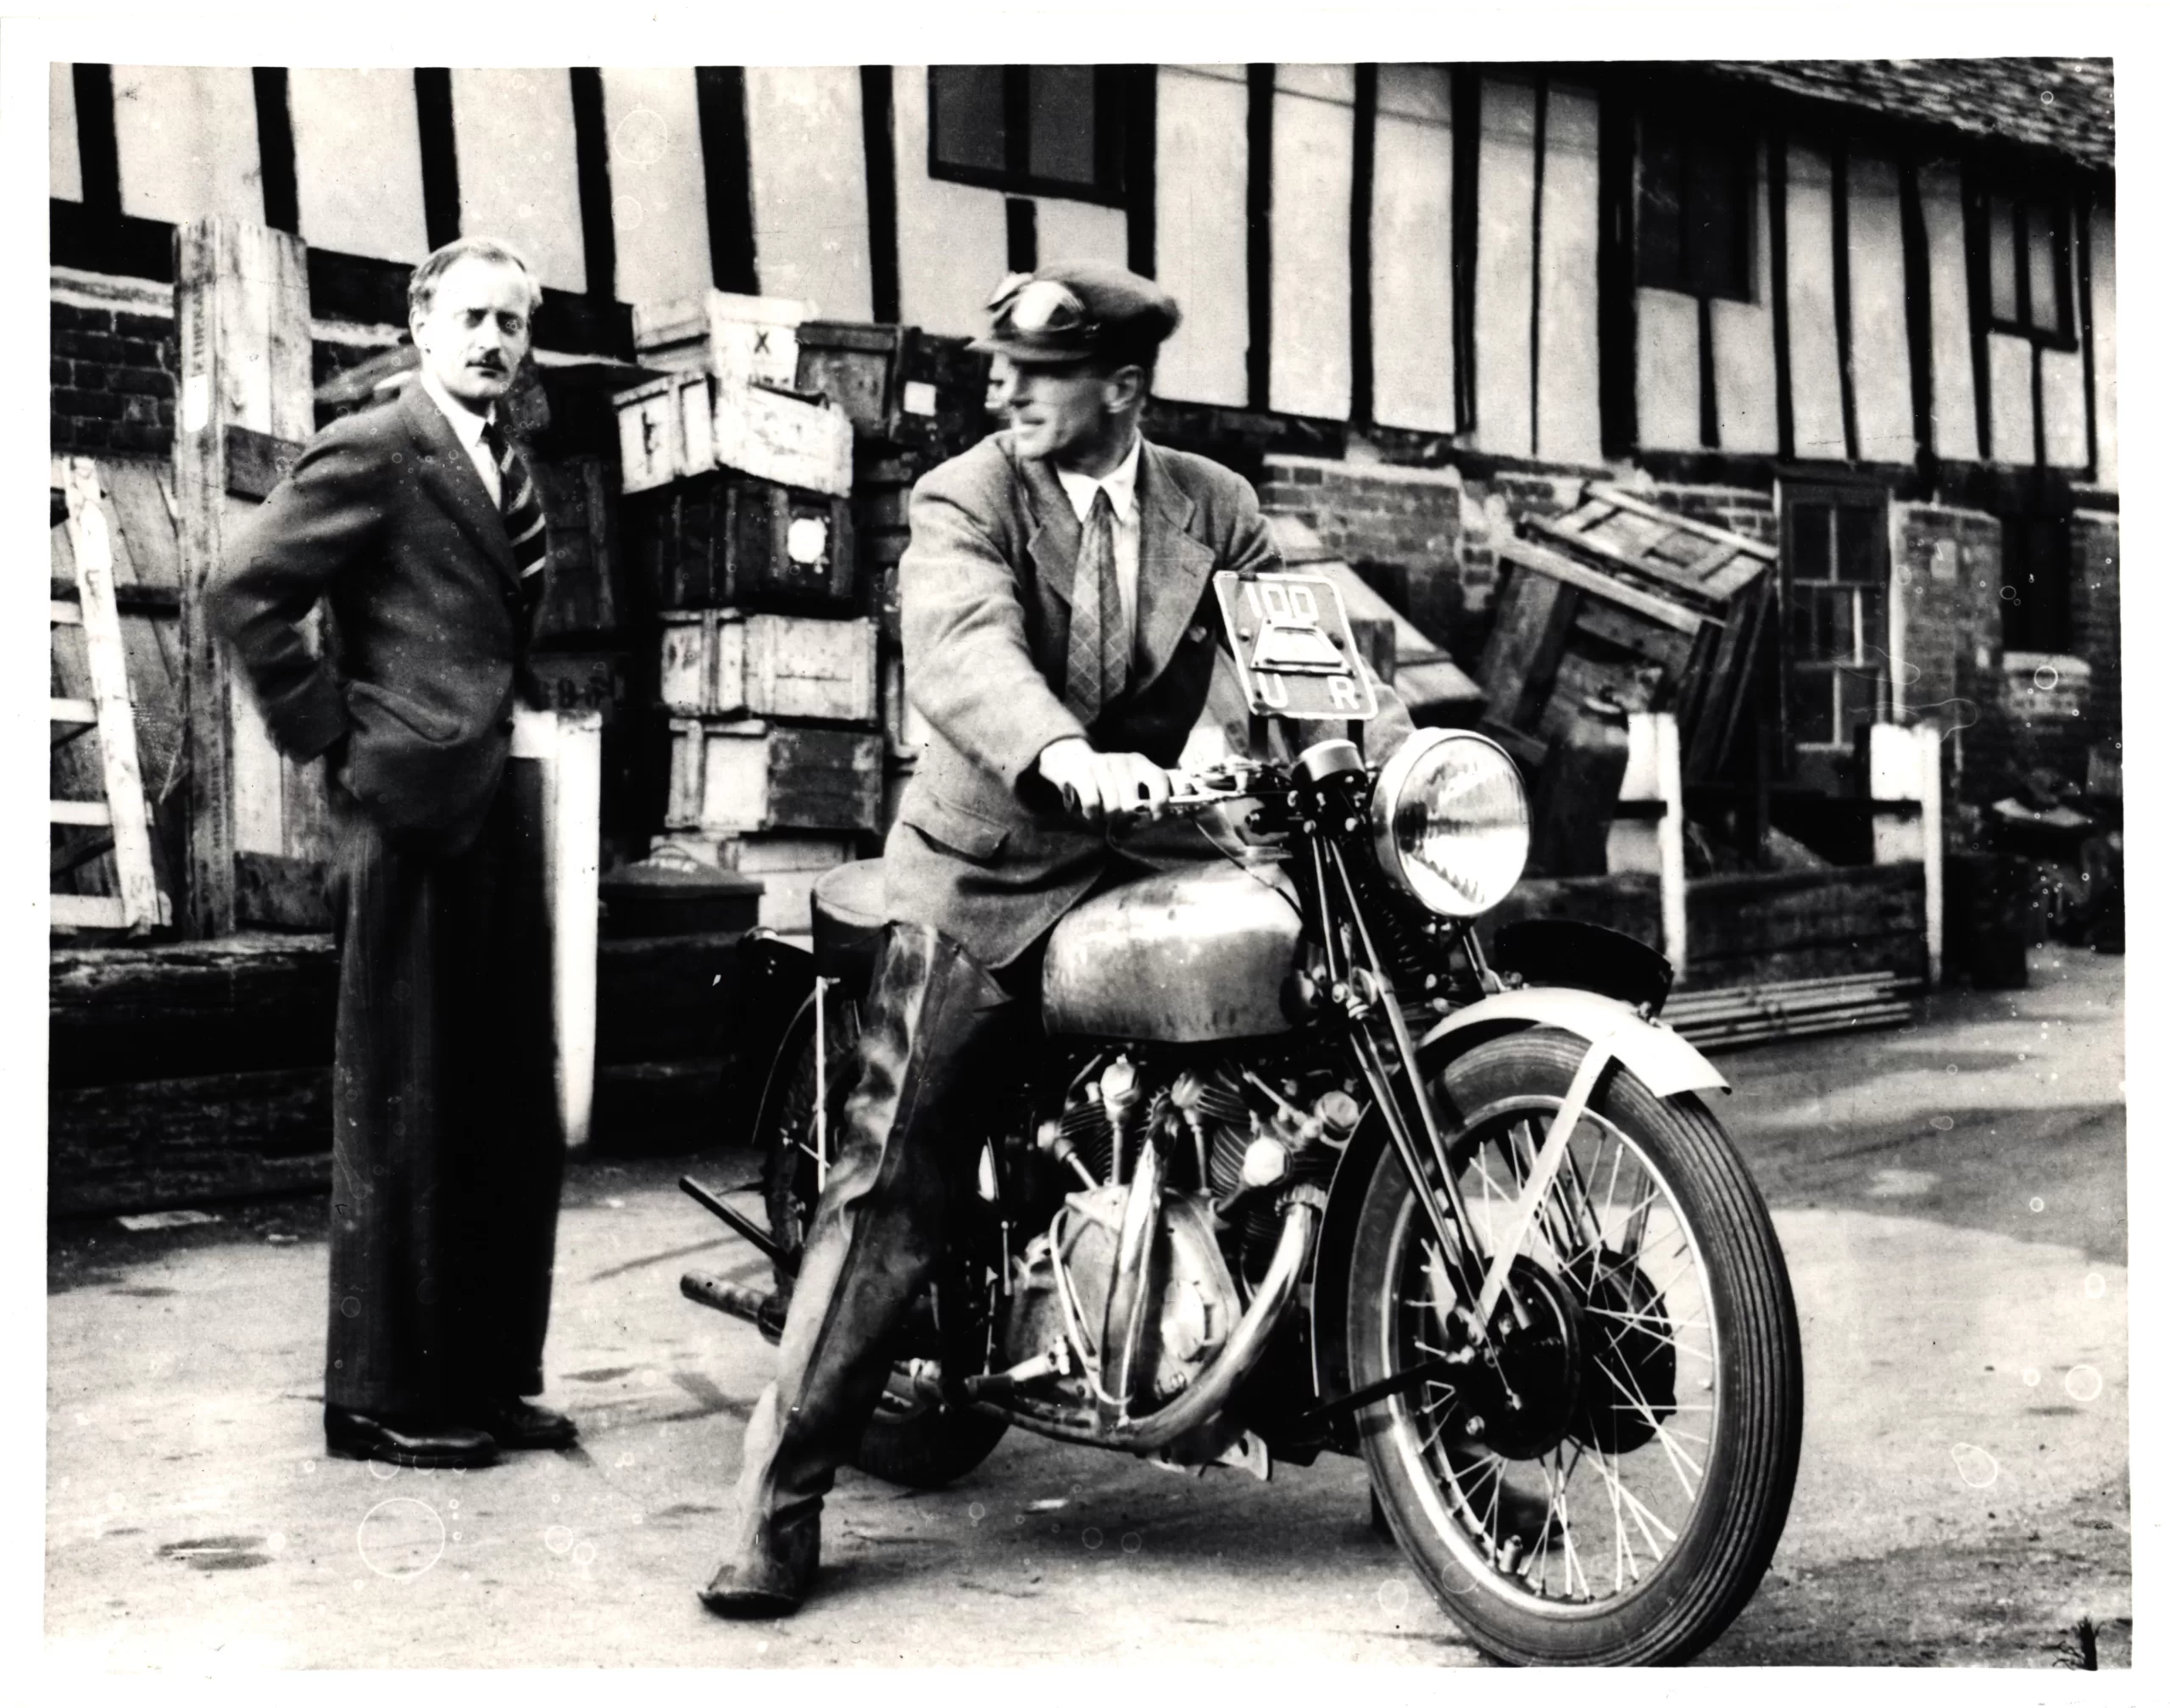 Philip Vincent with the first Rapide motorcycle in 1946